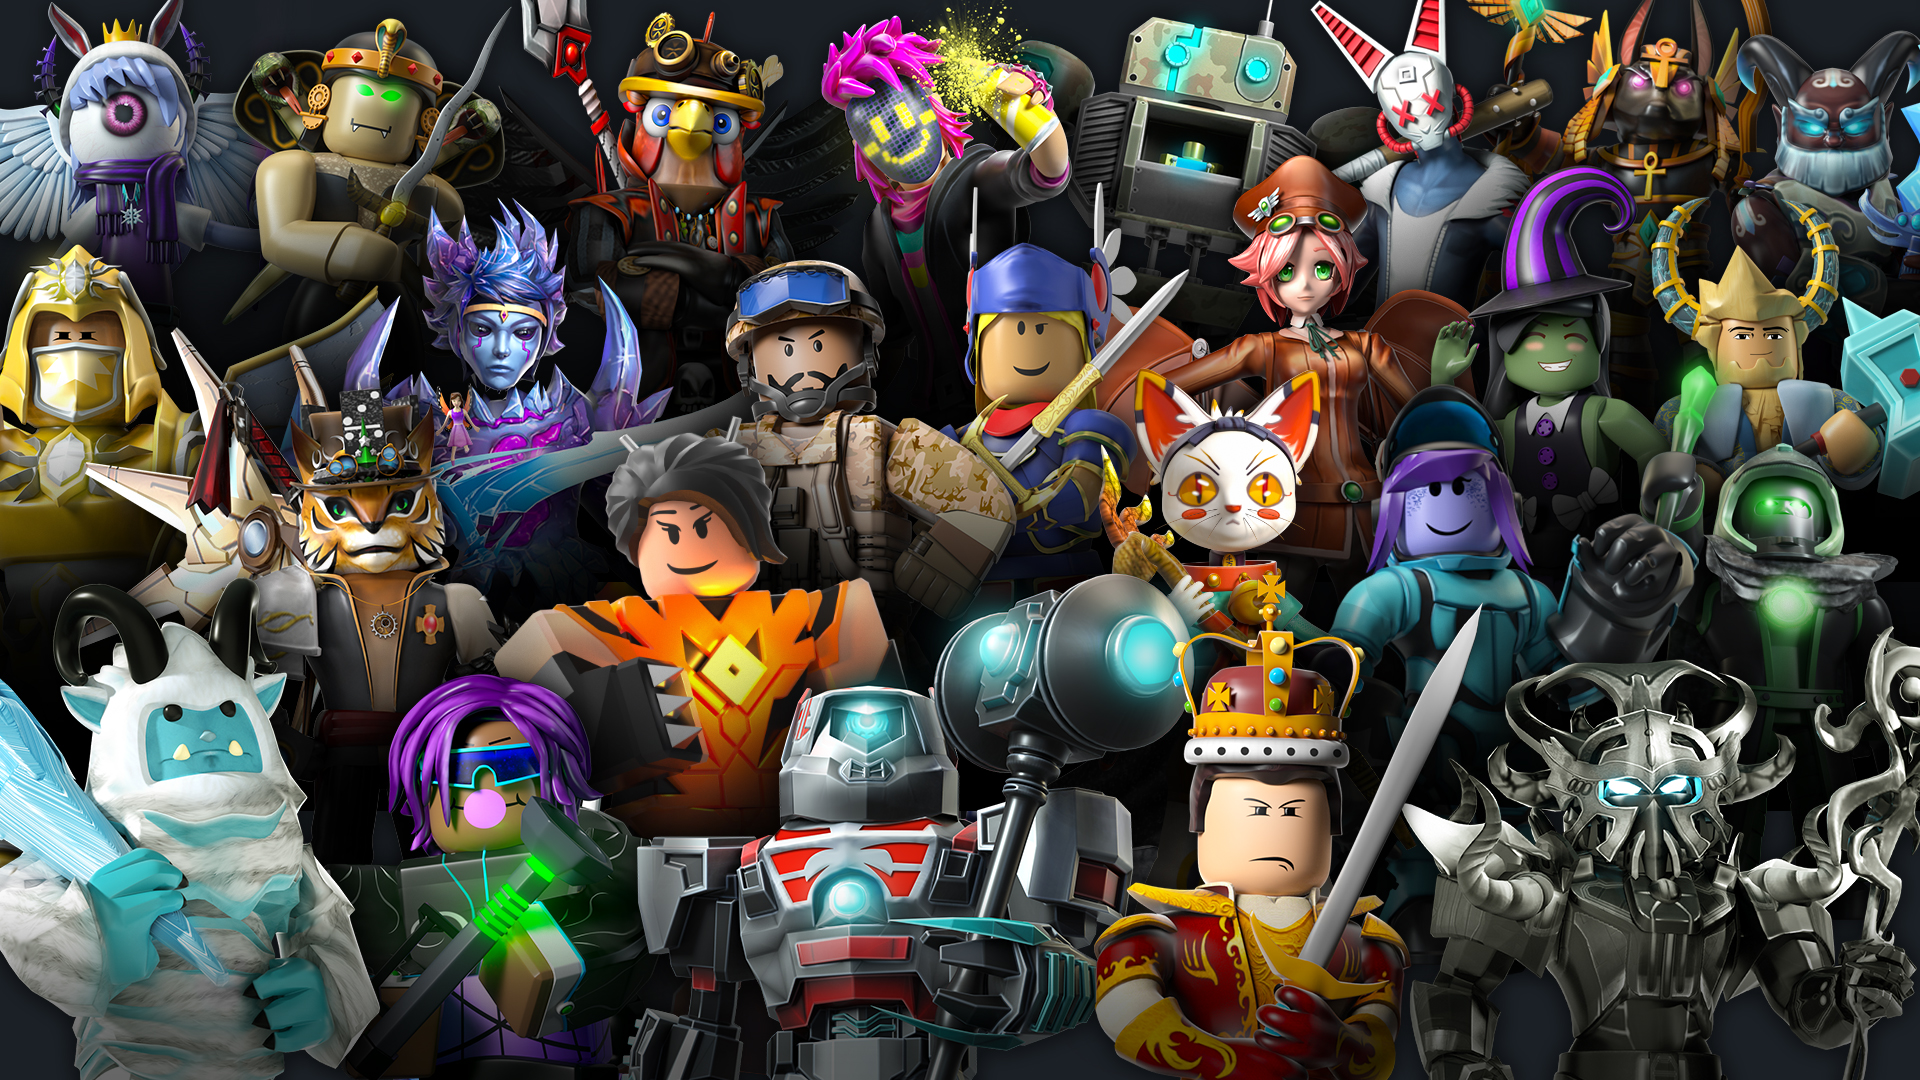 A large number of colorful Roblox avatars on a black background